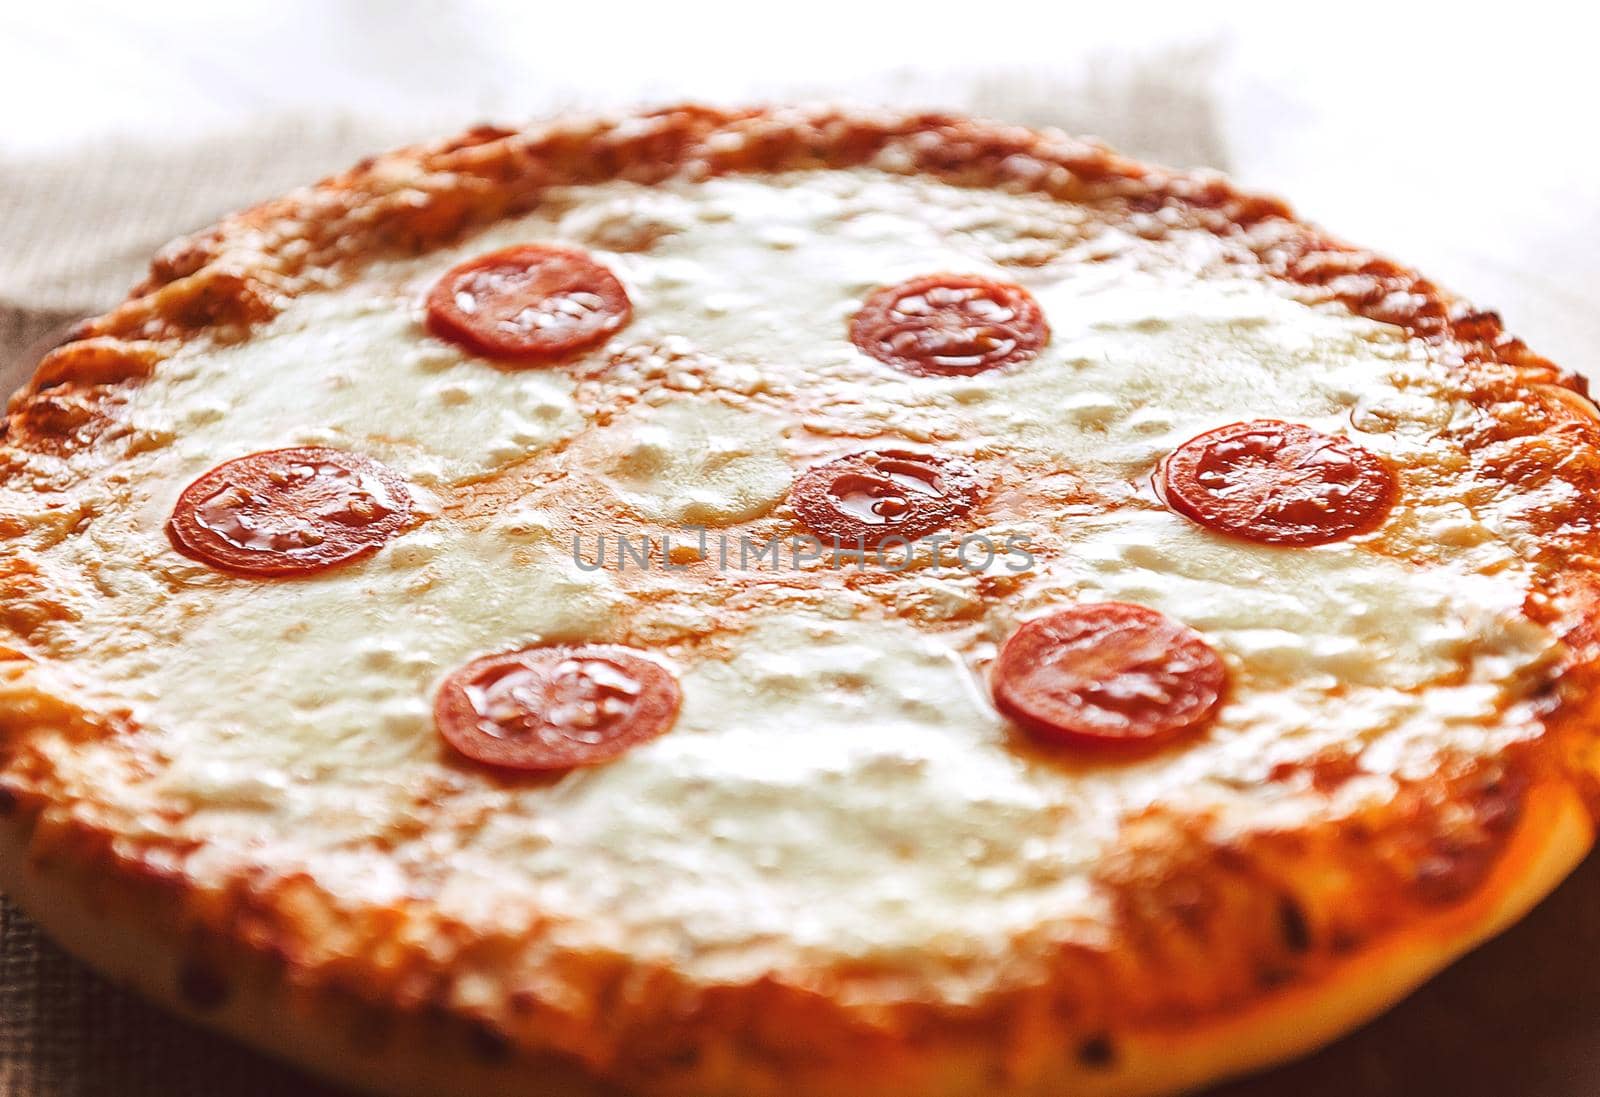 Hot Homemade Pepperoni Pizza Ready to Eat by vvmich